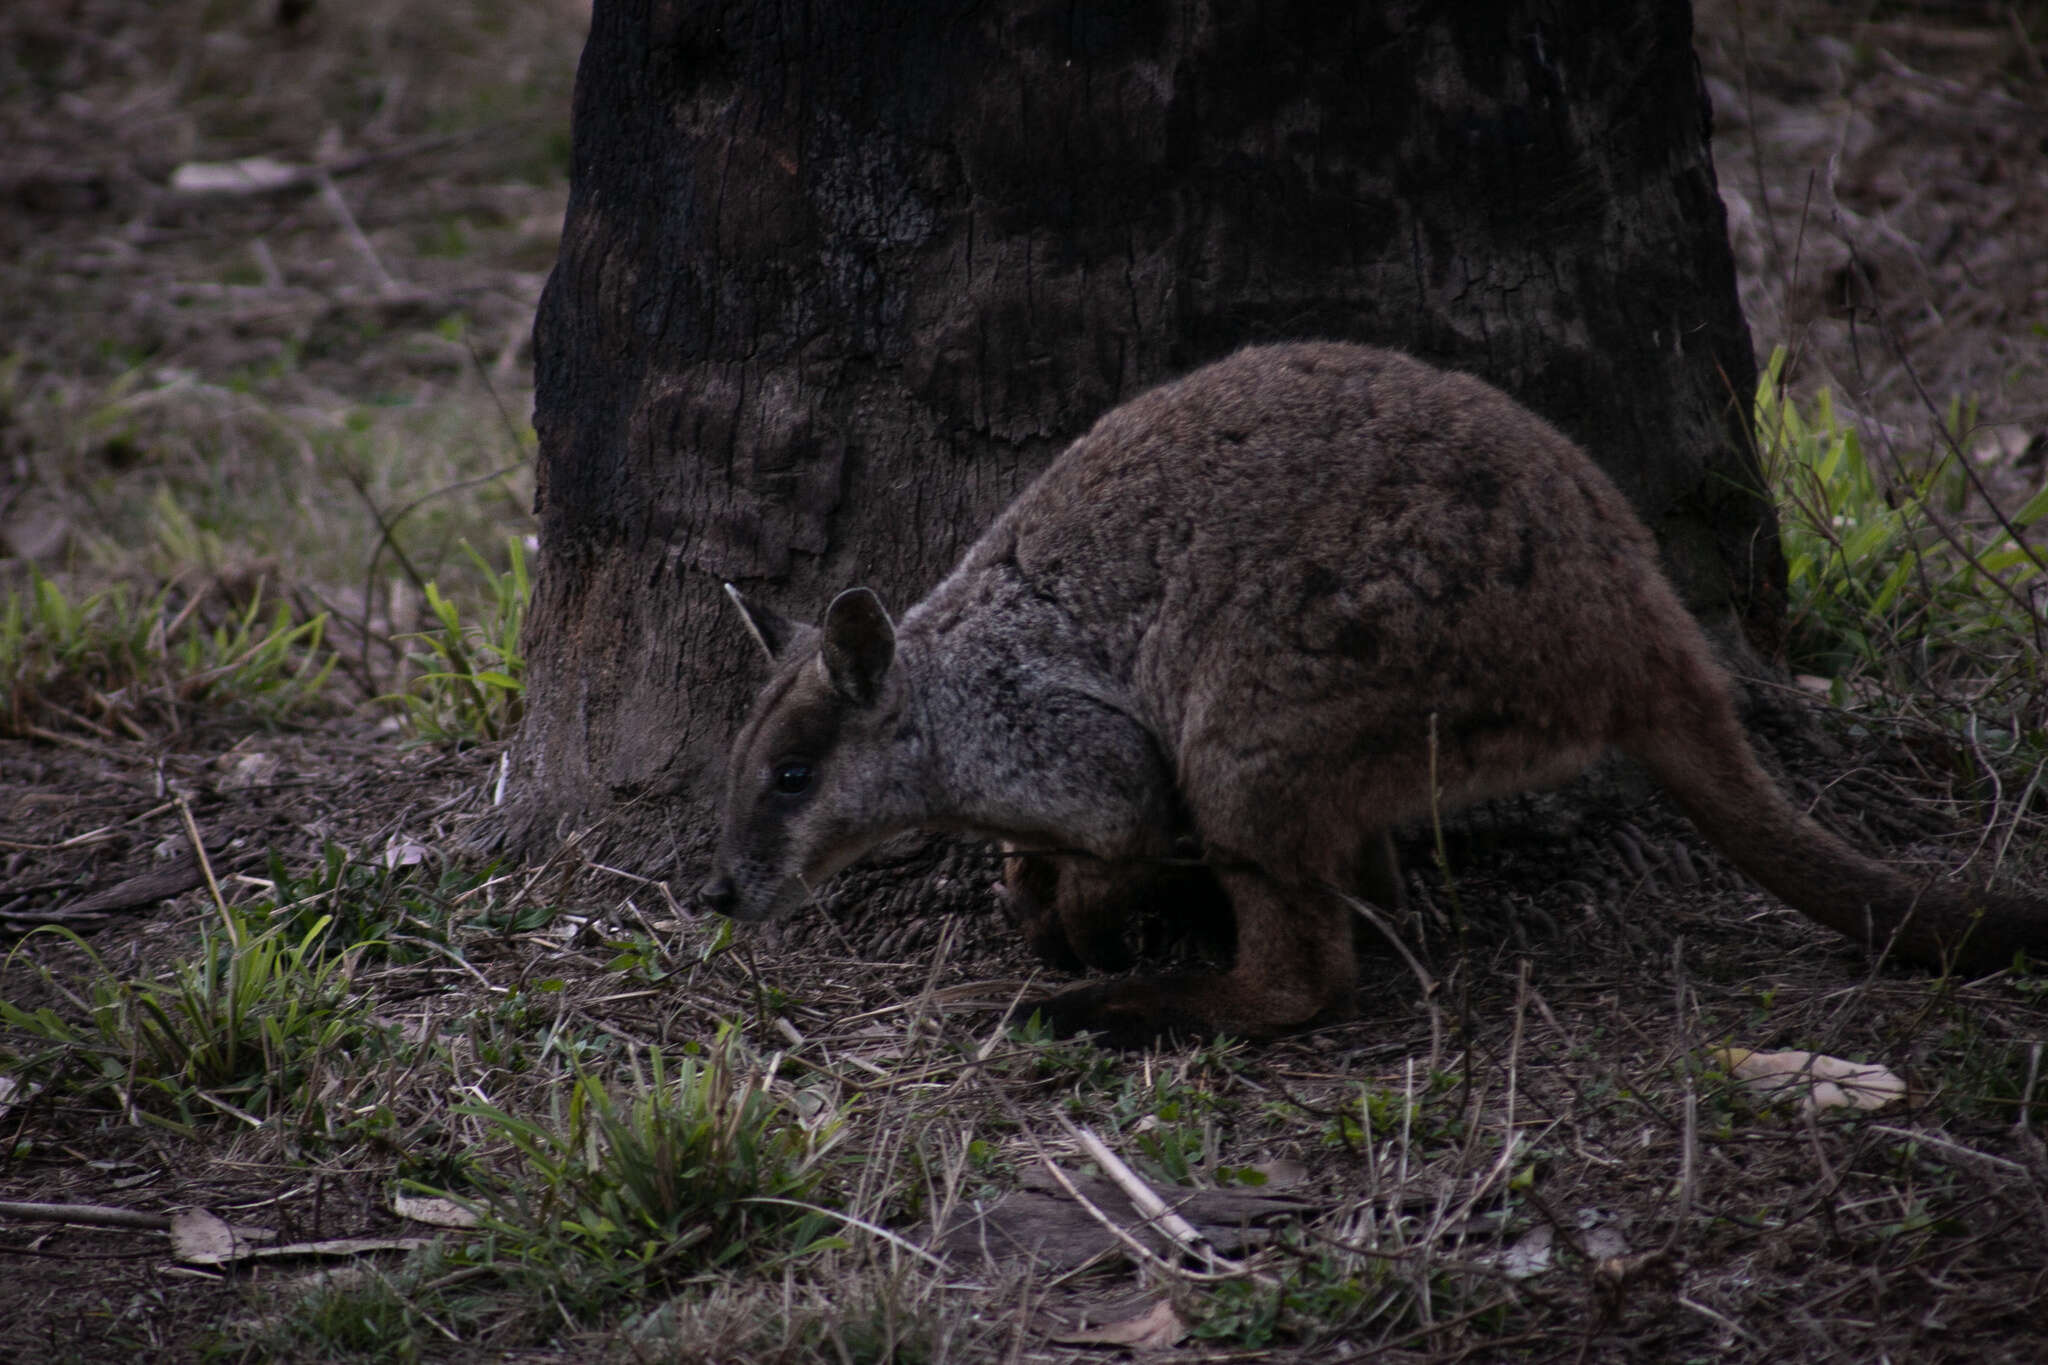 Image of Brush-tailed Rock Wallaby